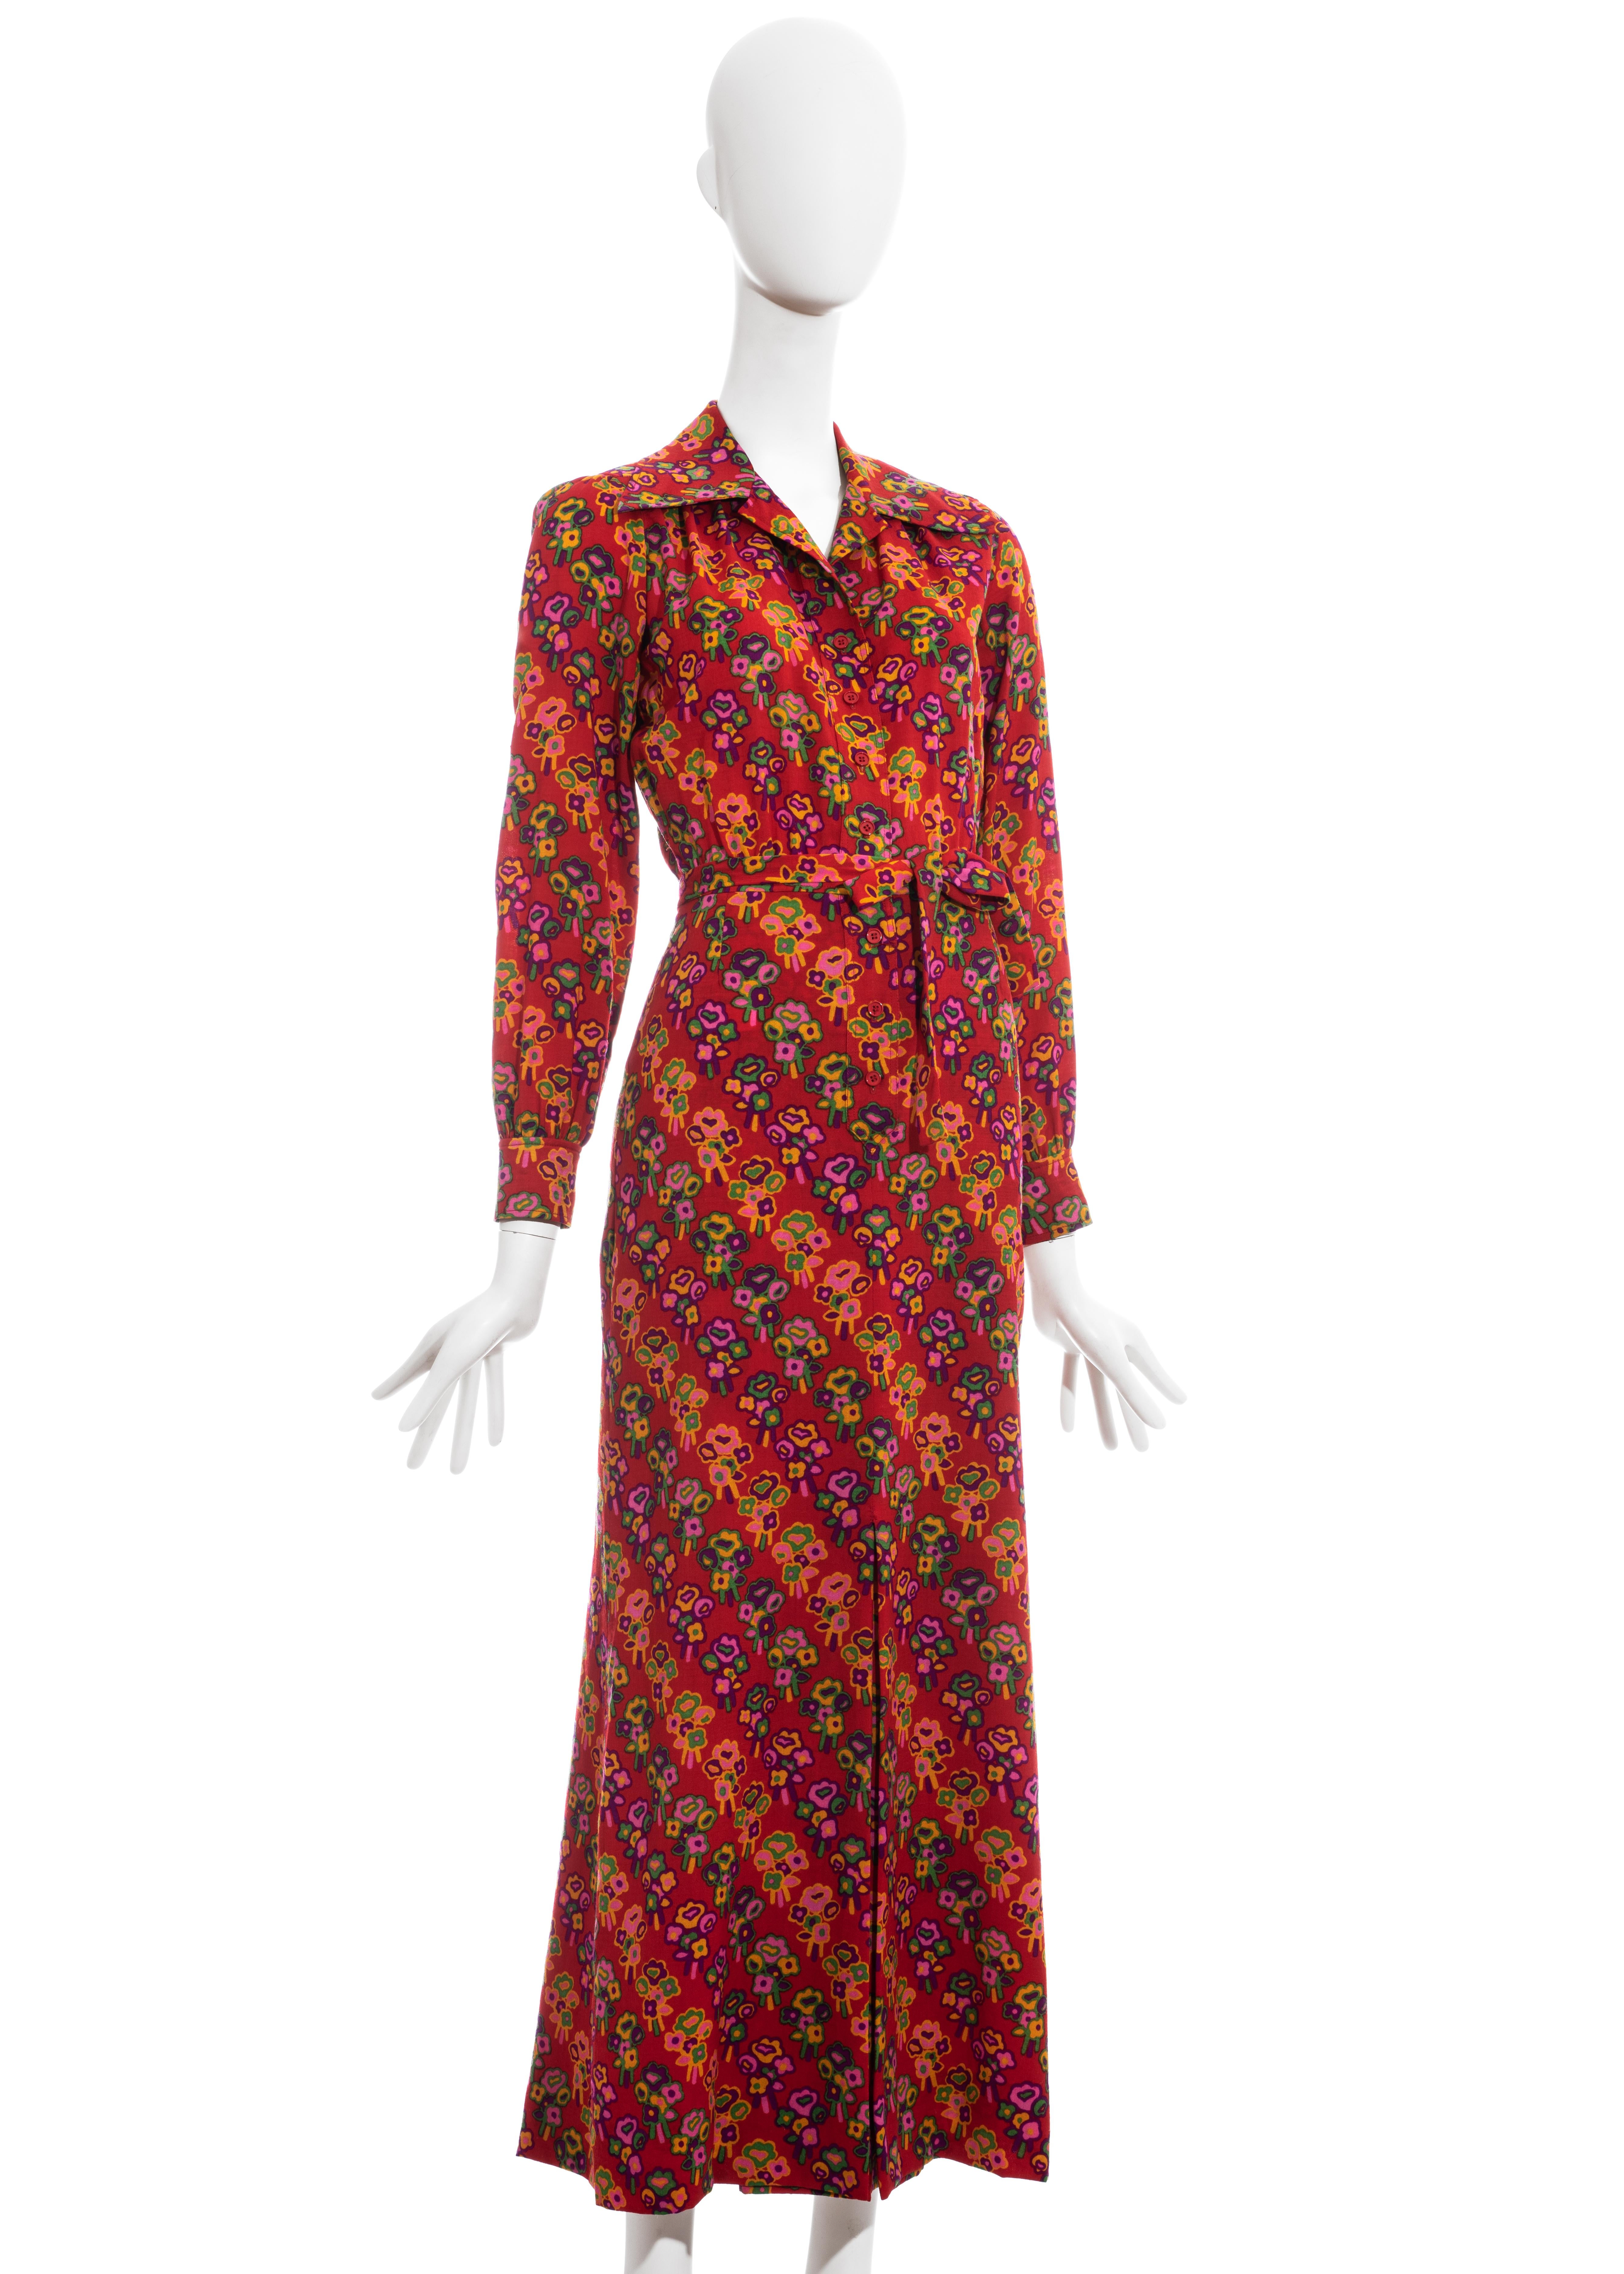 ▪ Yves Saint Laurent red floral maxi dress
▪ 100% Cotton
▪ Pointed collar
▪ Belted waist 
▪ FR 34 - UK 6 - US 2
▪ Spring-Summer 1971